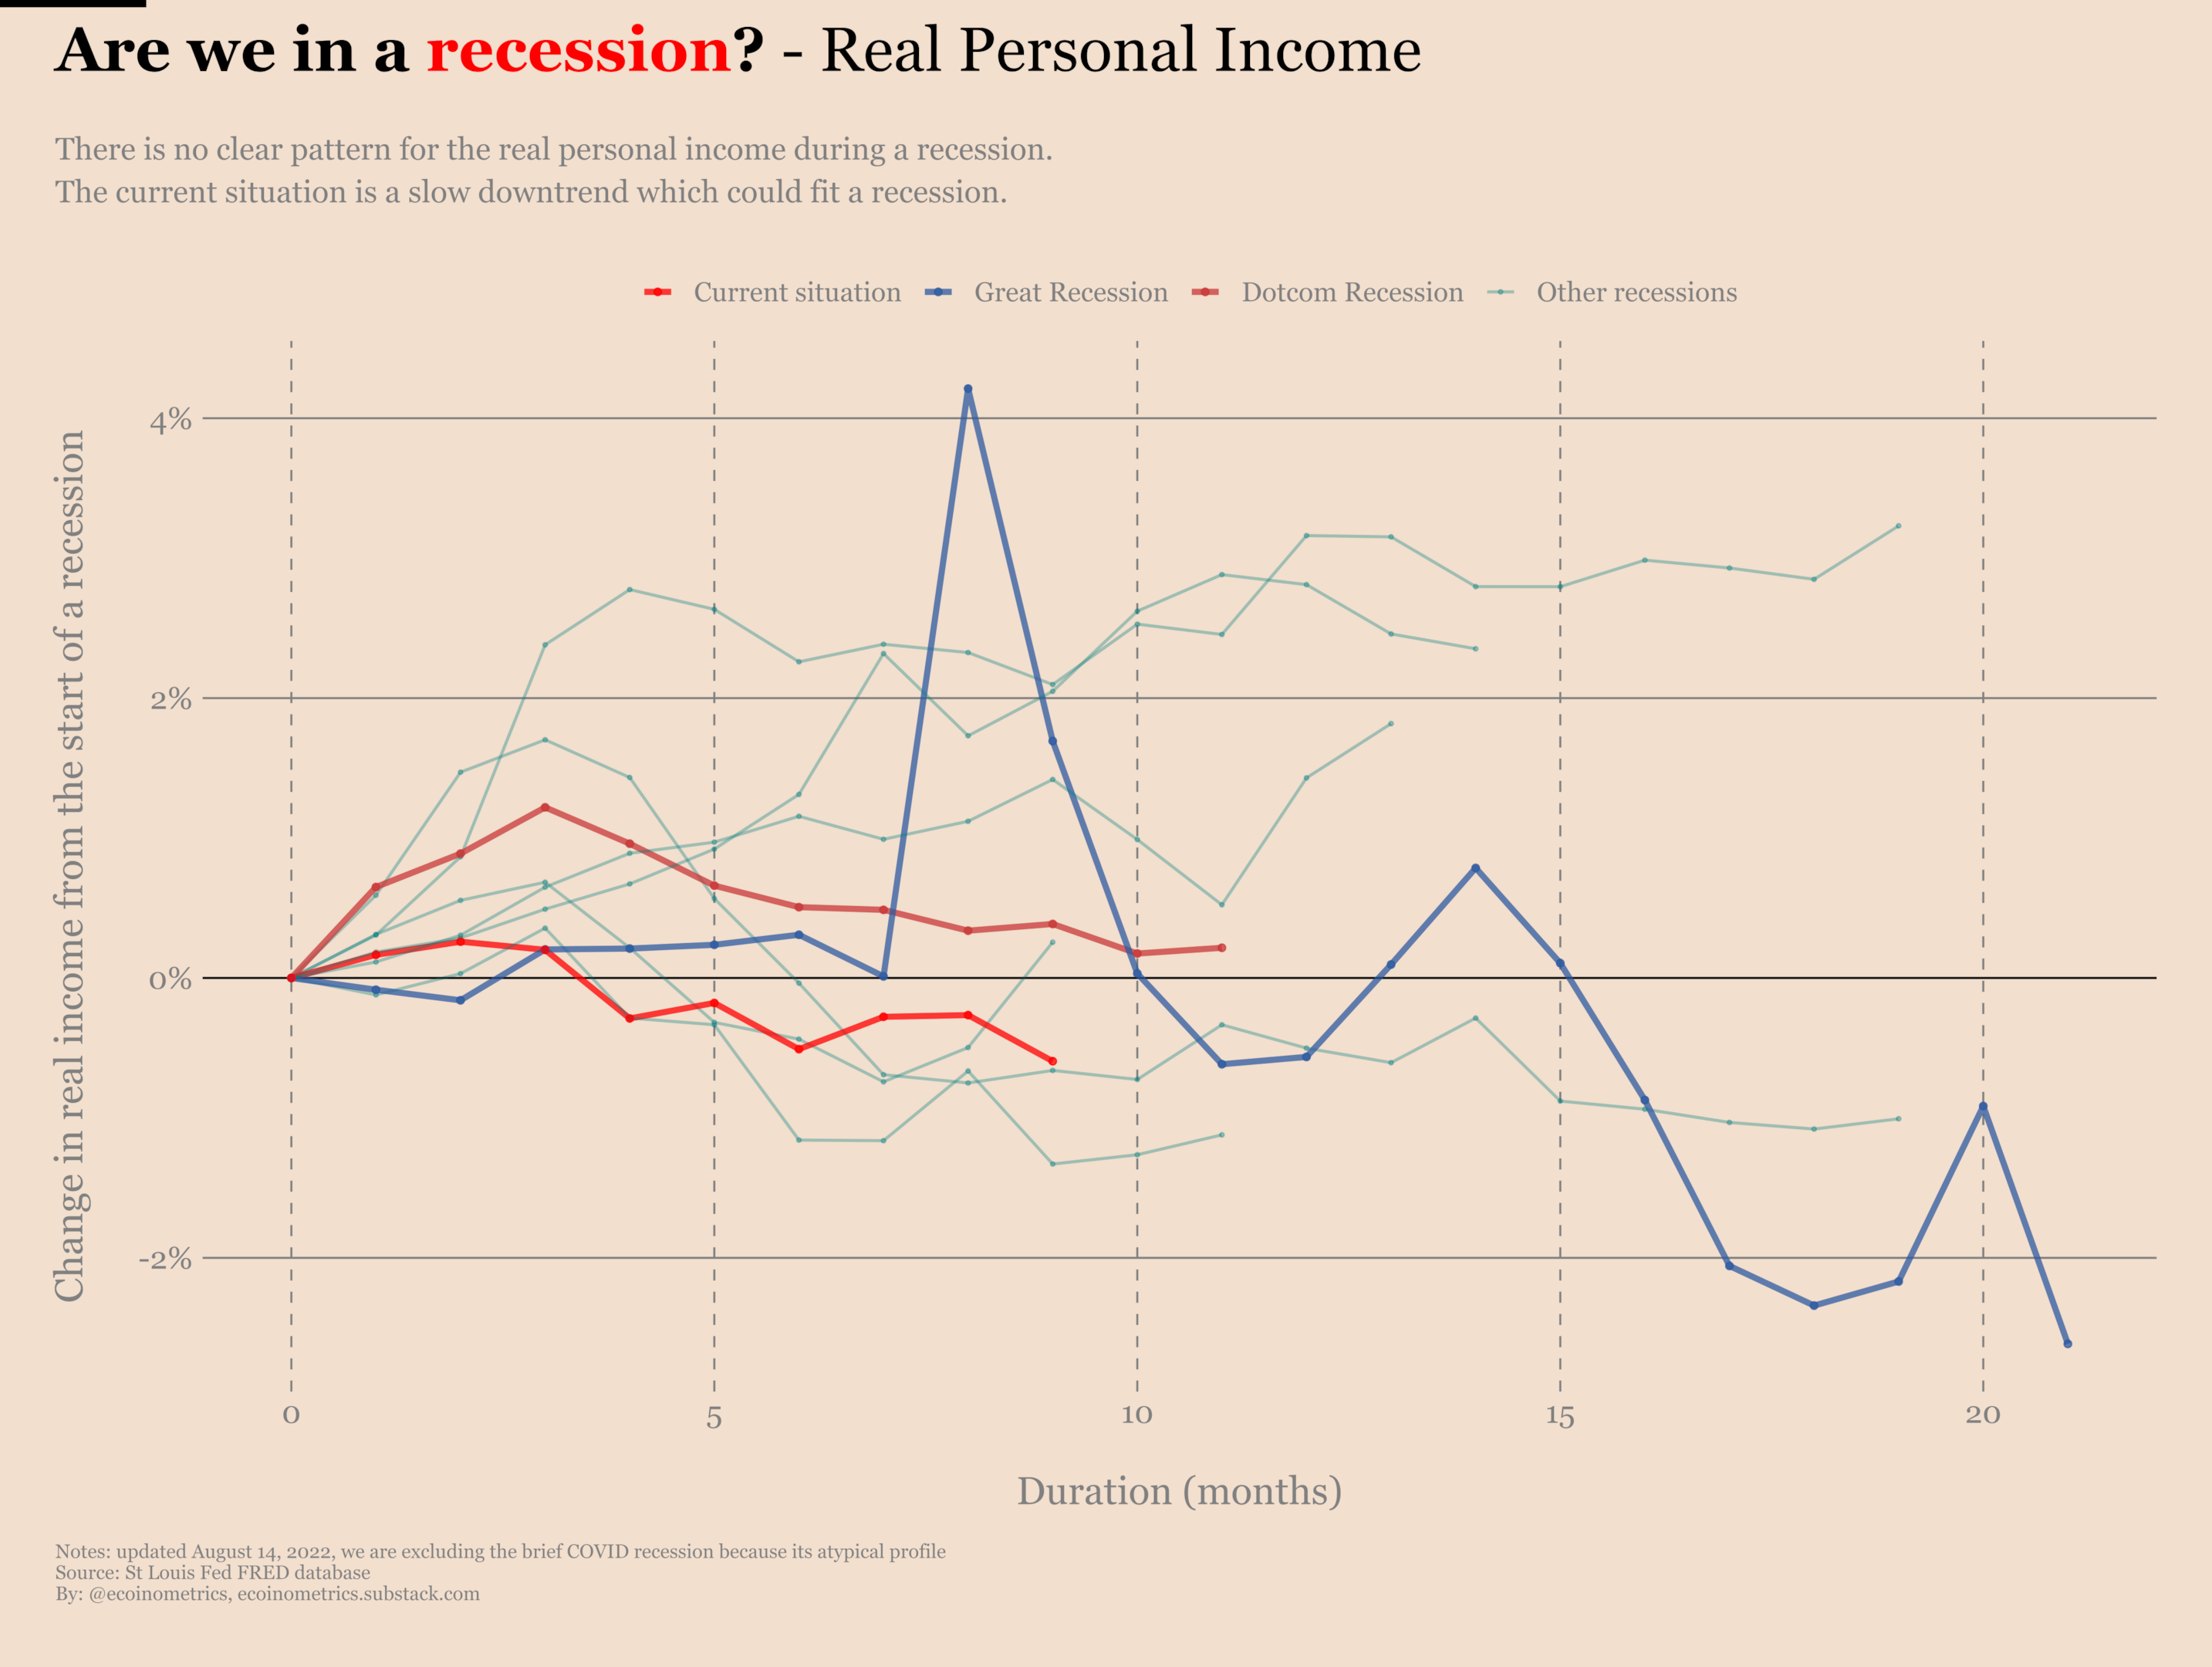 Comparing the evolution of real income to past recessions.